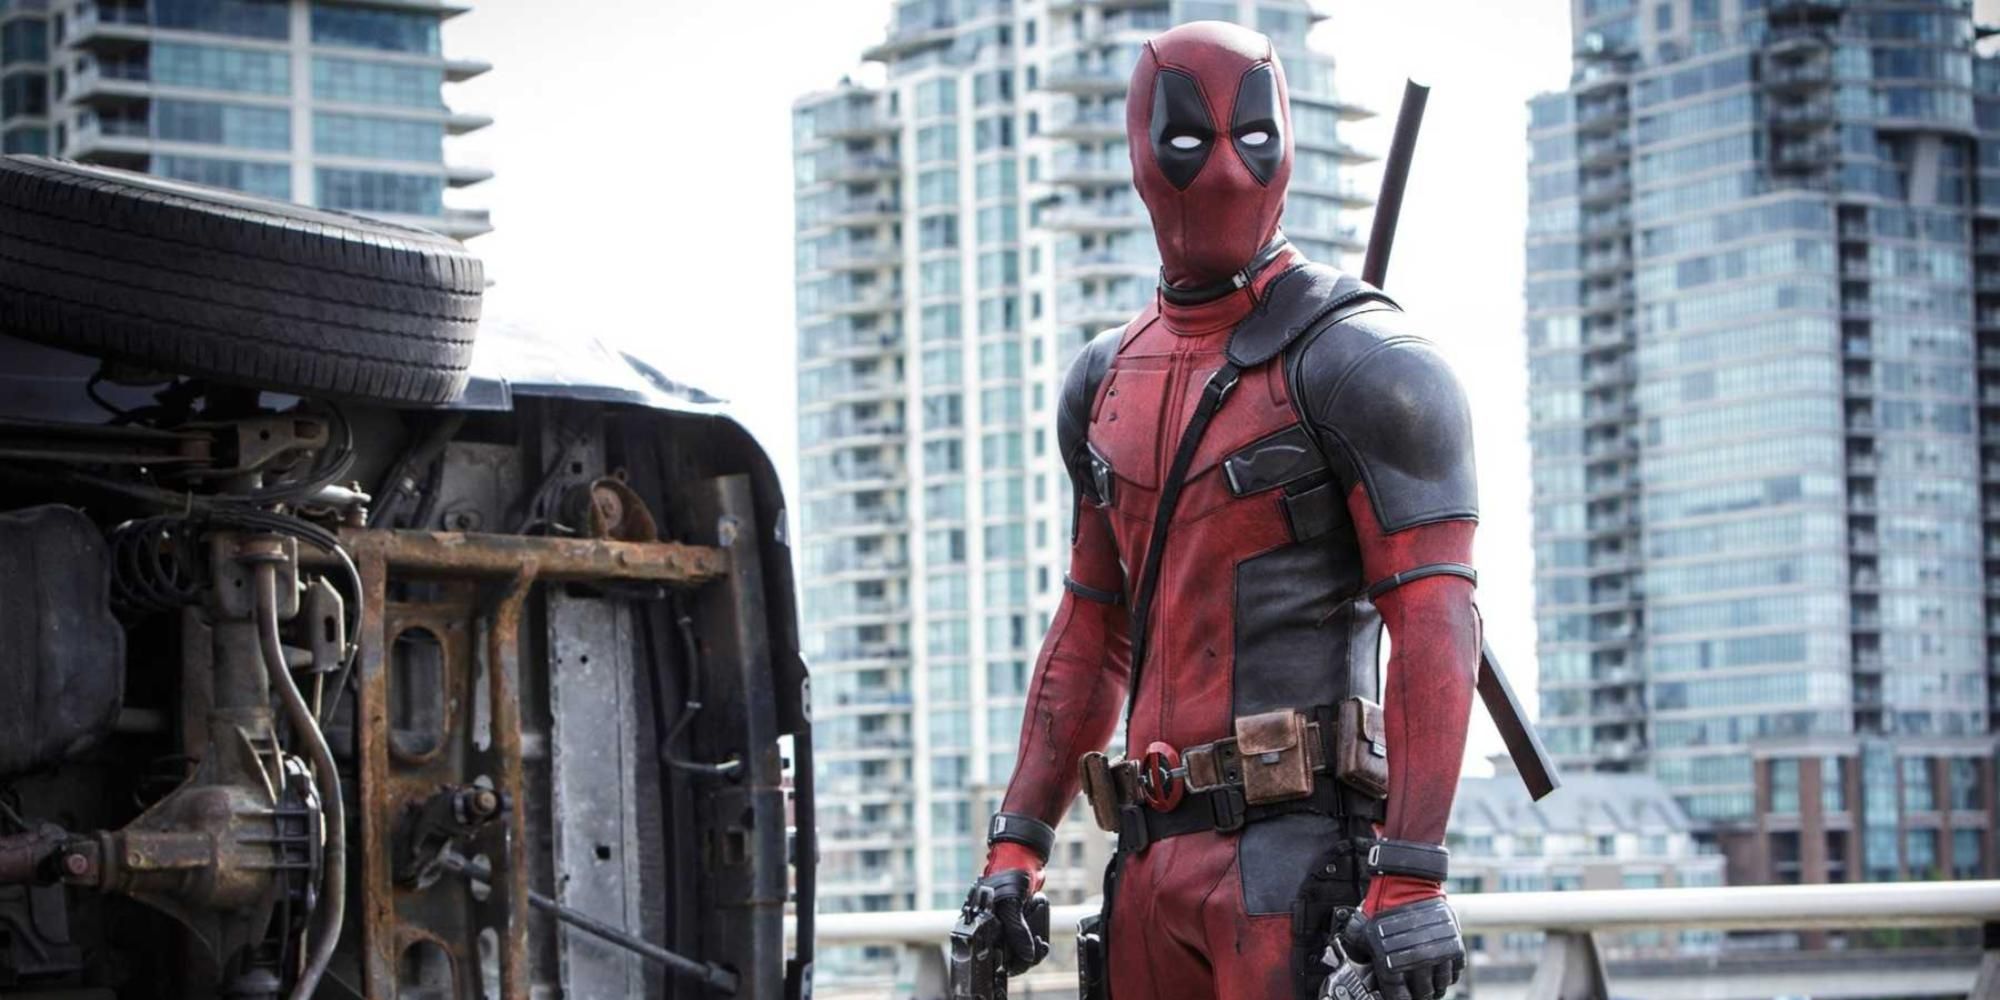 Deadpool stands in front of a overturned car in Deadpool